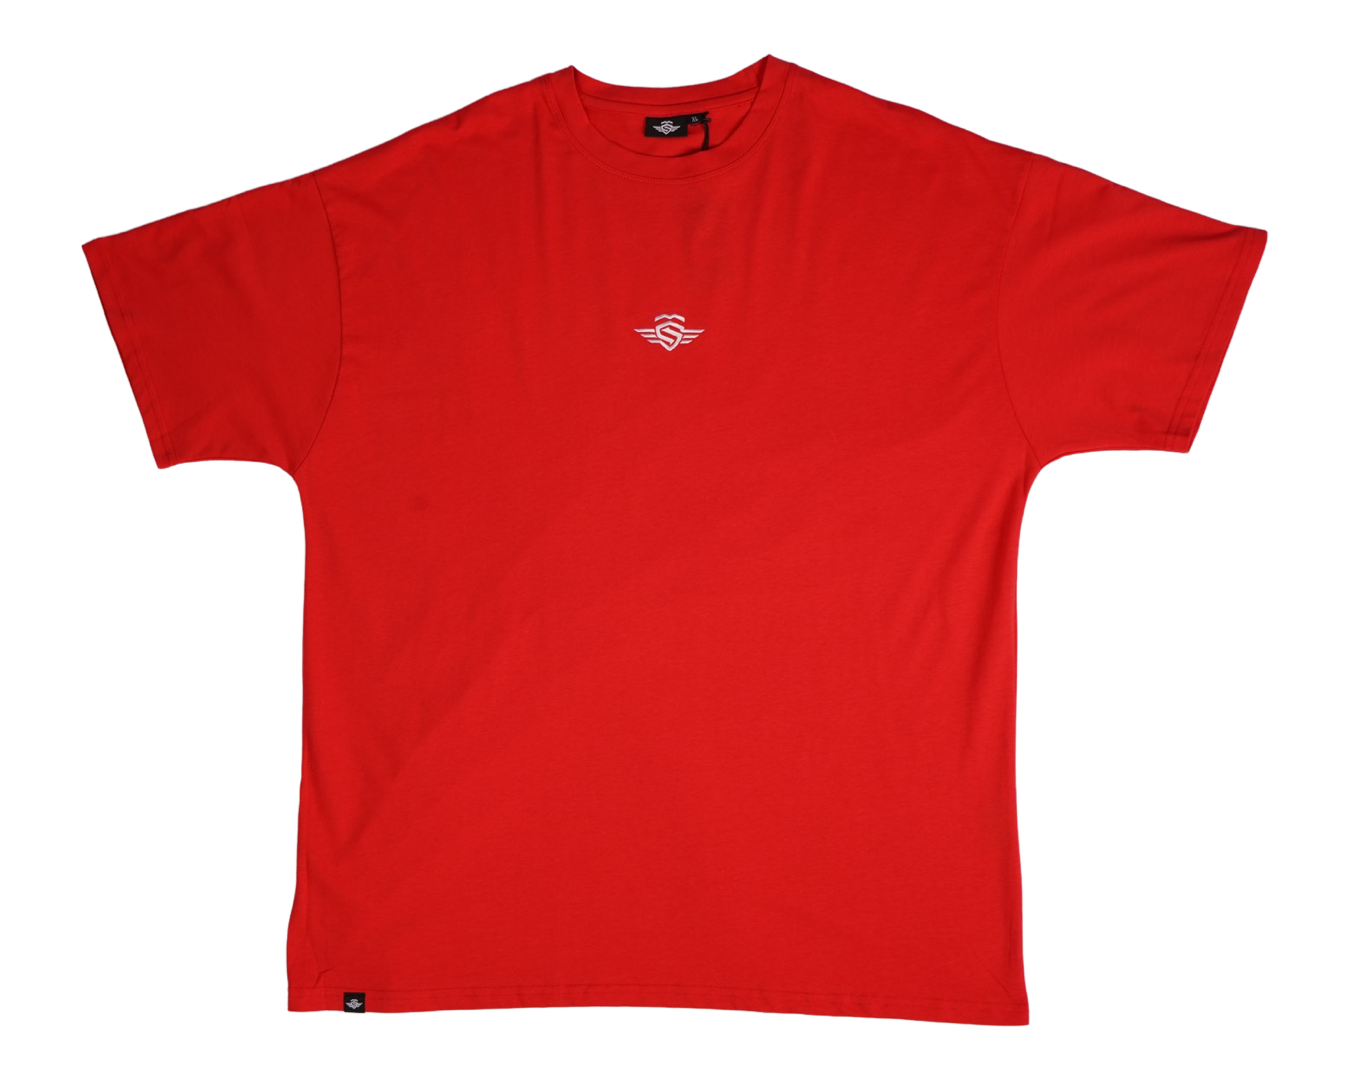 MASSIVE SOLDIER OVERSIZE SHIRT RED 